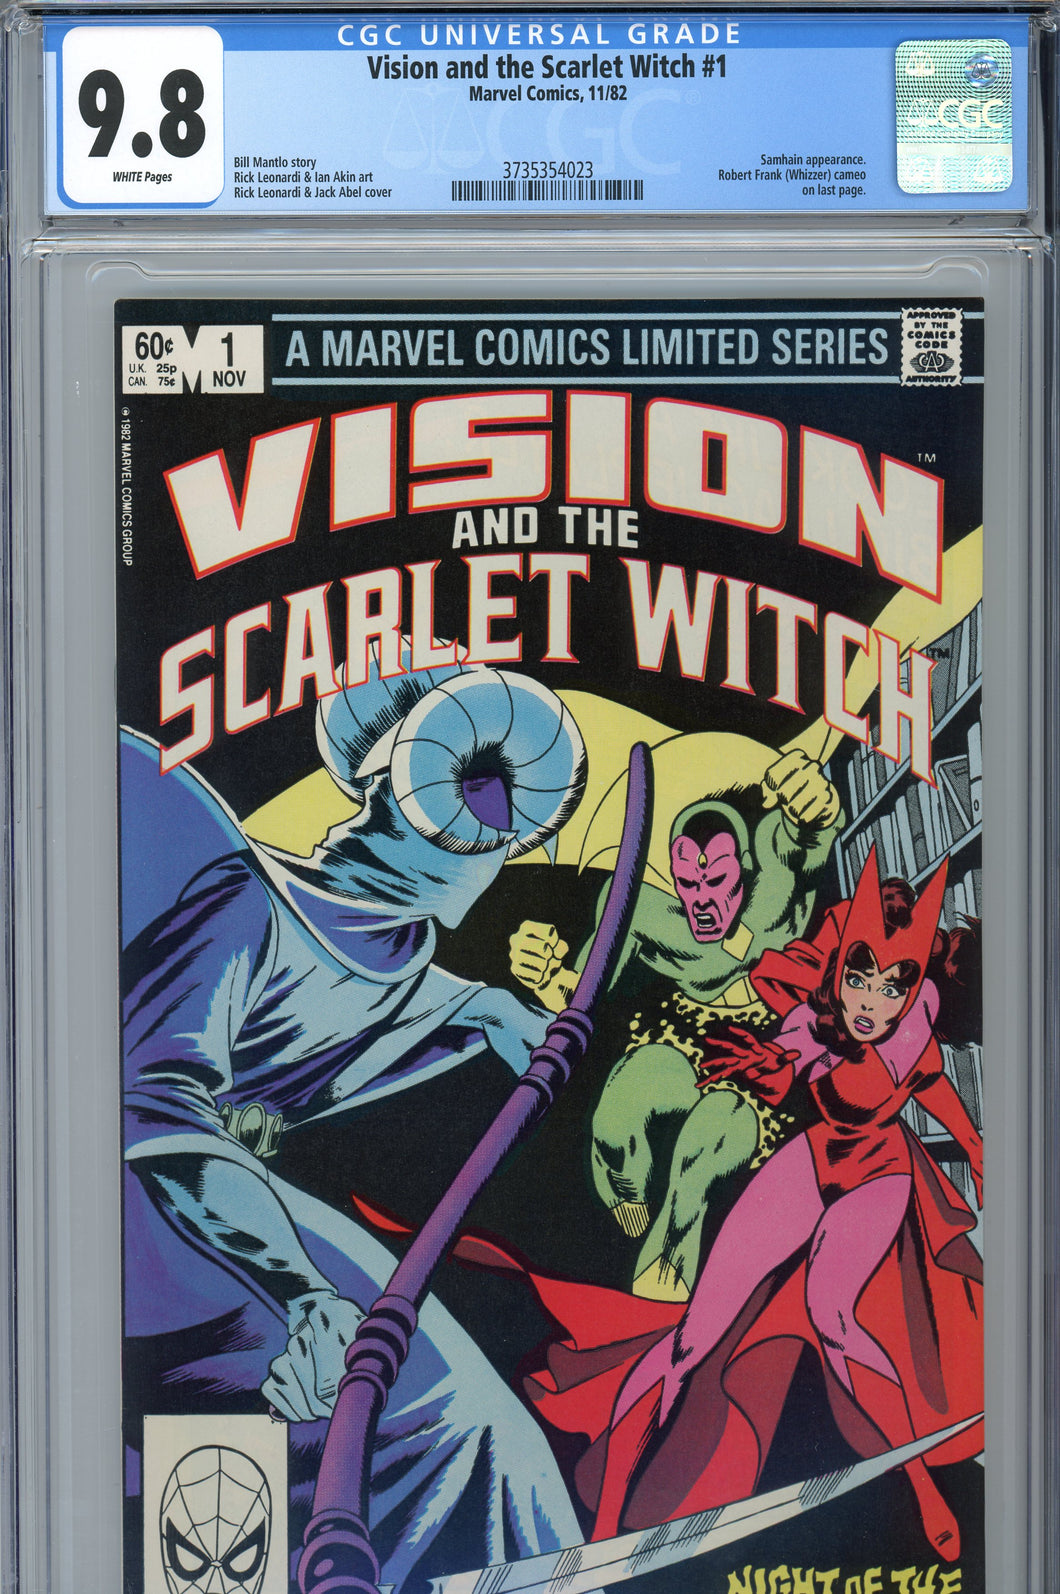 Vision and the Scarlet Witch #1 CGC 9.8